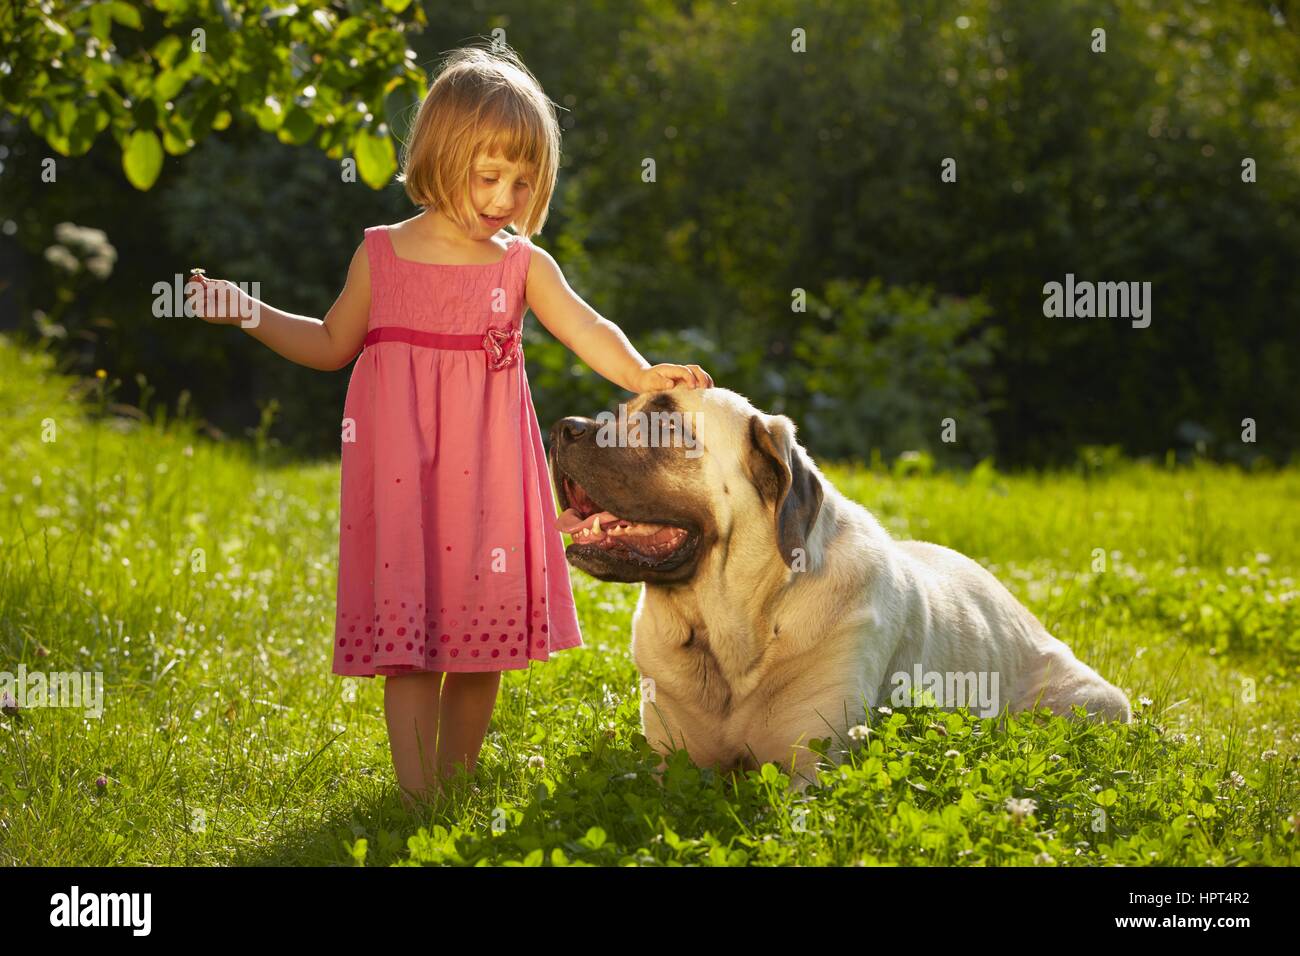 Little girl with large dog in the garden Stock Photo